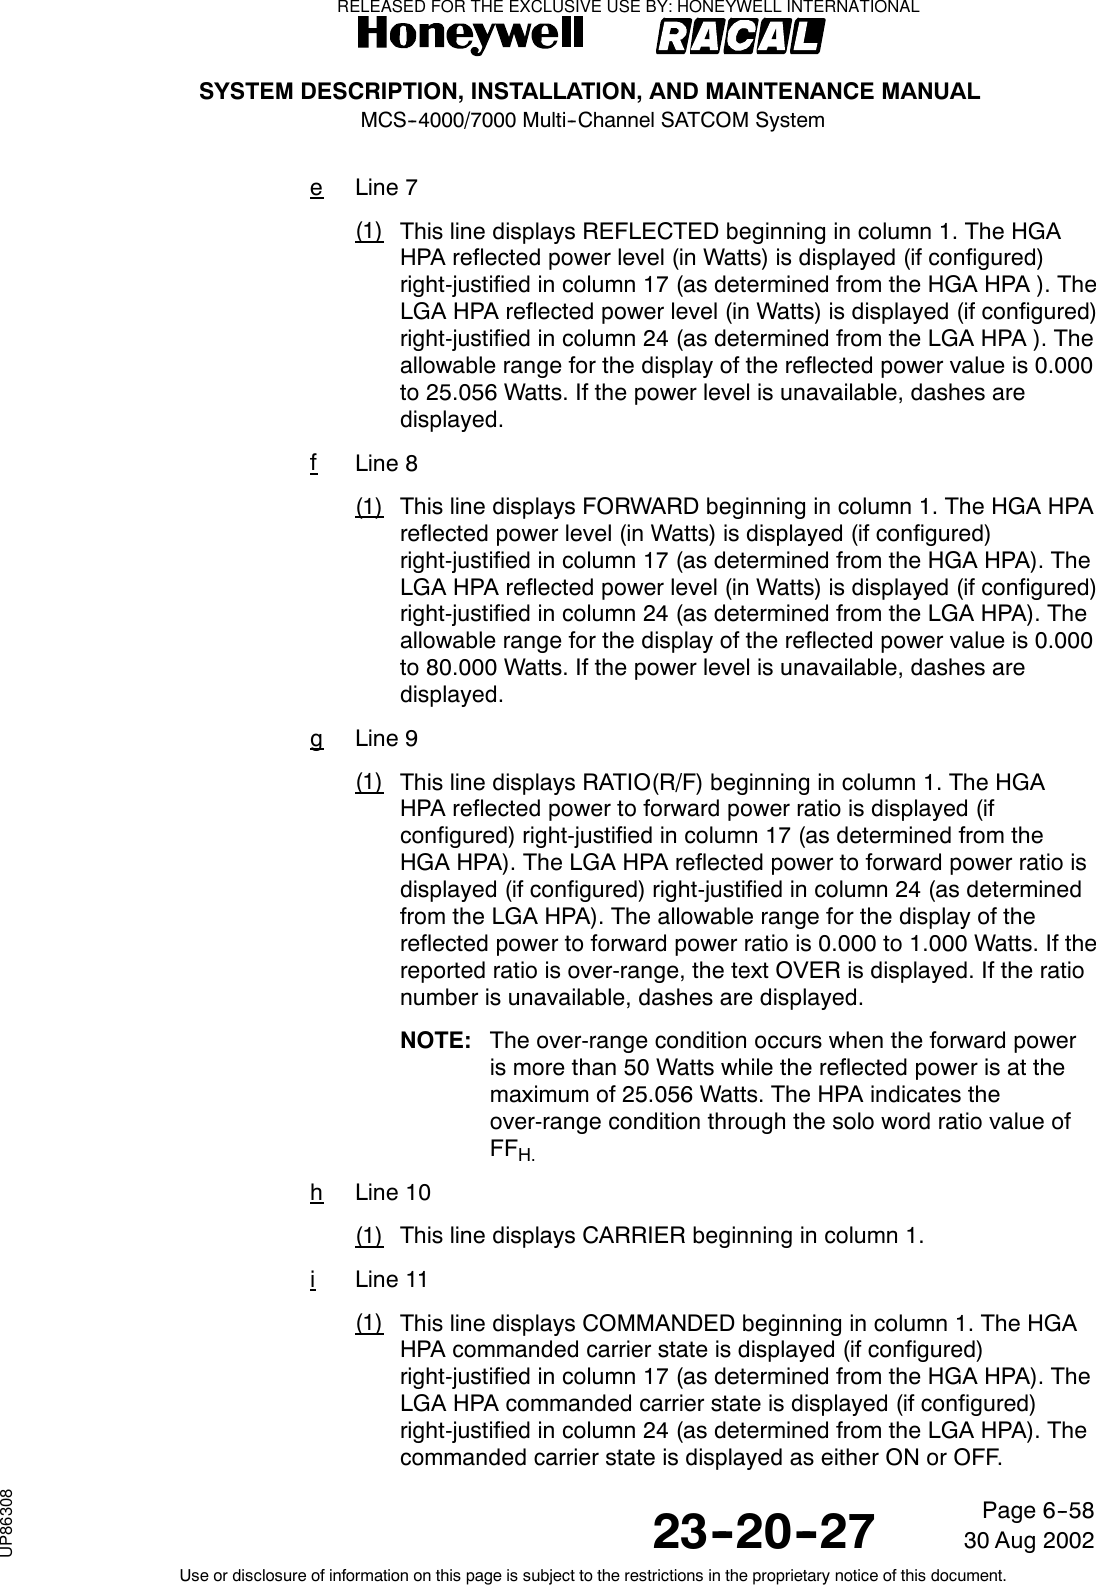 SYSTEM DESCRIPTION, INSTALLATION, AND MAINTENANCE MANUALMCS--4000/7000 Multi--Channel SATCOM System23--20--2730 Aug 2002Use or disclosure of information on this page is subject to the restrictions in the proprietary notice of this document.Page 6--58eLine 7(1) This line displays REFLECTED beginning in column 1. The HGAHPA reflected power level (in Watts) is displayed (if configured)right-justified in column 17 (as determined from the HGA HPA ). TheLGA HPA reflected power level (in Watts) is displayed (if configured)right-justified in column 24 (as determined from the LGA HPA ). Theallowable range for the display of the reflected power value is 0.000to 25.056 Watts. If the power level is unavailable, dashes aredisplayed.fLine 8(1) This line displays FORWARD beginning in column 1. The HGA HPAreflected power level (in Watts) is displayed (if configured)right-justified in column 17 (as determined from the HGA HPA). TheLGA HPA reflected power level (in Watts) is displayed (if configured)right-justified in column 24 (as determined from the LGA HPA). Theallowable range for the display of the reflected power value is 0.000to 80.000 Watts. If the power level is unavailable, dashes aredisplayed.gLine 9(1) This line displays RATIO(R/F) beginning in column 1. The HGAHPA reflected power to forward power ratio is displayed (ifconfigured) right-justified in column 17 (as determined from theHGA HPA). The LGA HPA reflected power to forward power ratio isdisplayed (if configured) right-justified in column 24 (as determinedfrom the LGA HPA). The allowable range for the display of thereflected power to forward power ratio is 0.000 to 1.000 Watts. If thereported ratio is over-range, the text OVER is displayed. If the rationumber is unavailable, dashes are displayed.NOTE: The over-range condition occurs when the forward poweris more than 50 Watts while the reflected power is at themaximum of 25.056 Watts. The HPA indicates theover-range condition through the solo word ratio value ofFFH.hLine 10(1) This line displays CARRIER beginning in column 1.iLine 11(1) This line displays COMMANDED beginning in column 1. The HGAHPA commanded carrier state is displayed (if configured)right-justified in column 17 (as determined from the HGA HPA). TheLGA HPA commanded carrier state is displayed (if configured)right-justified in column 24 (as determined from the LGA HPA). Thecommanded carrier state is displayed as either ON or OFF.RELEASED FOR THE EXCLUSIVE USE BY: HONEYWELL INTERNATIONALUP86308